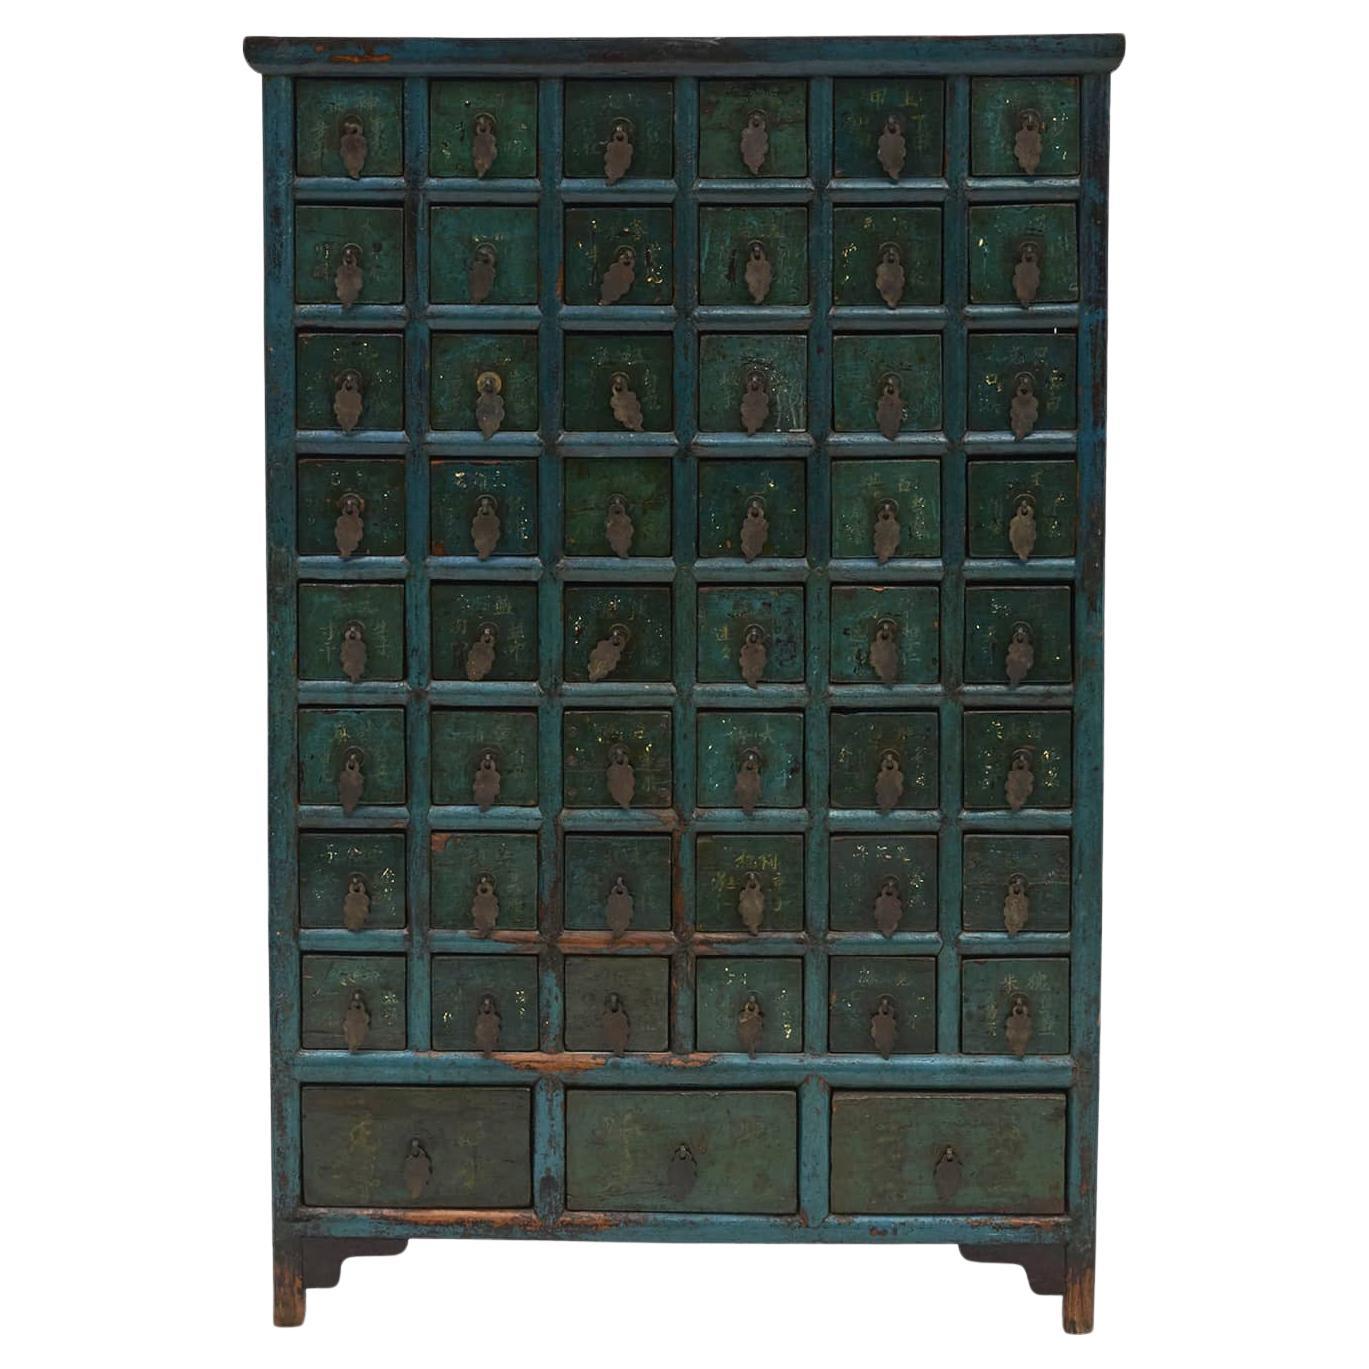 Mid 19th Century Chinese Apothecary Medicine Chest with 51 Drawers